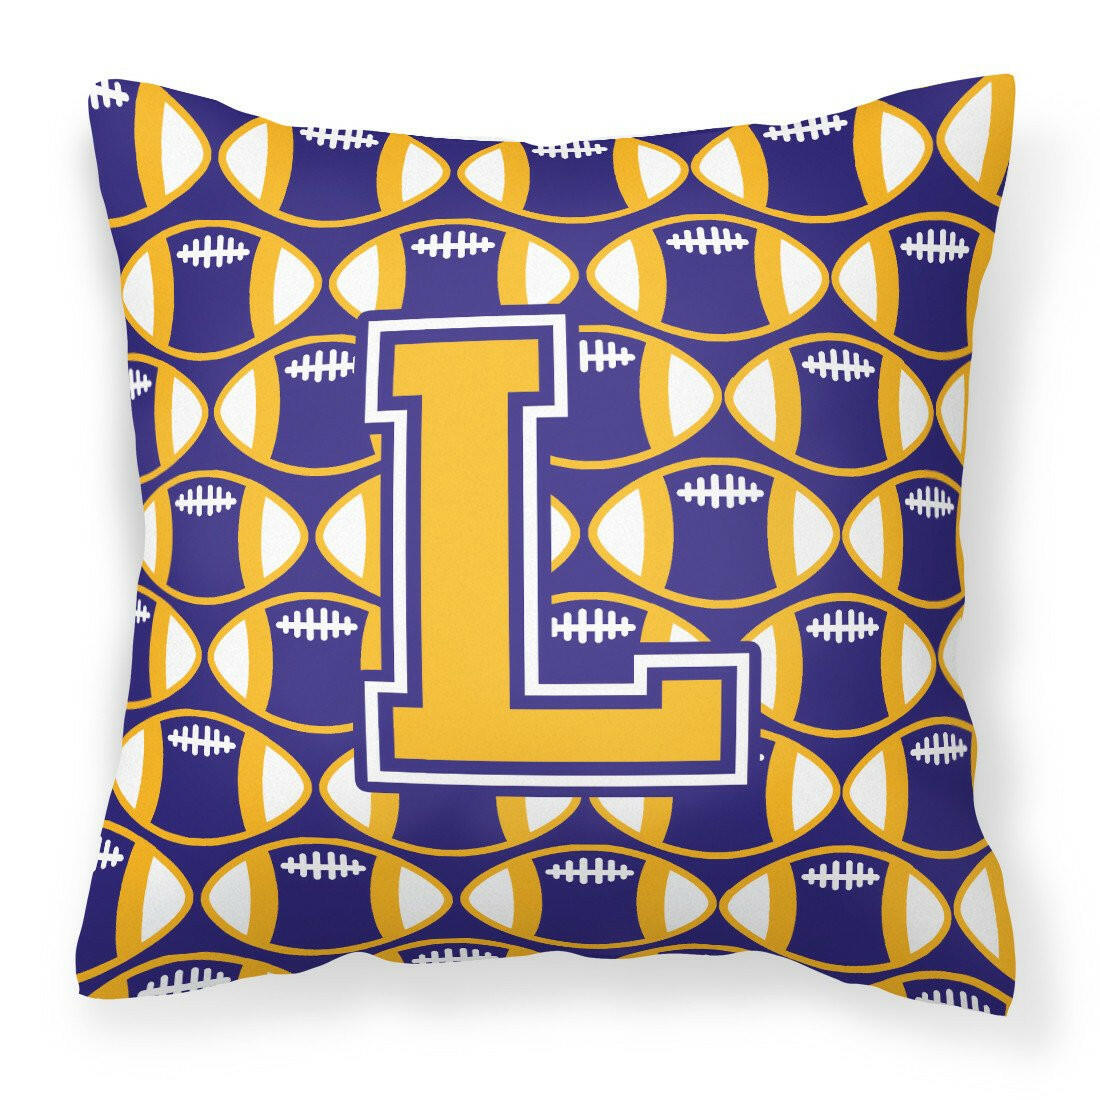 Letter L Football Purple and Gold Fabric Decorative Pillow CJ1064-LPW1414 by Caroline's Treasures